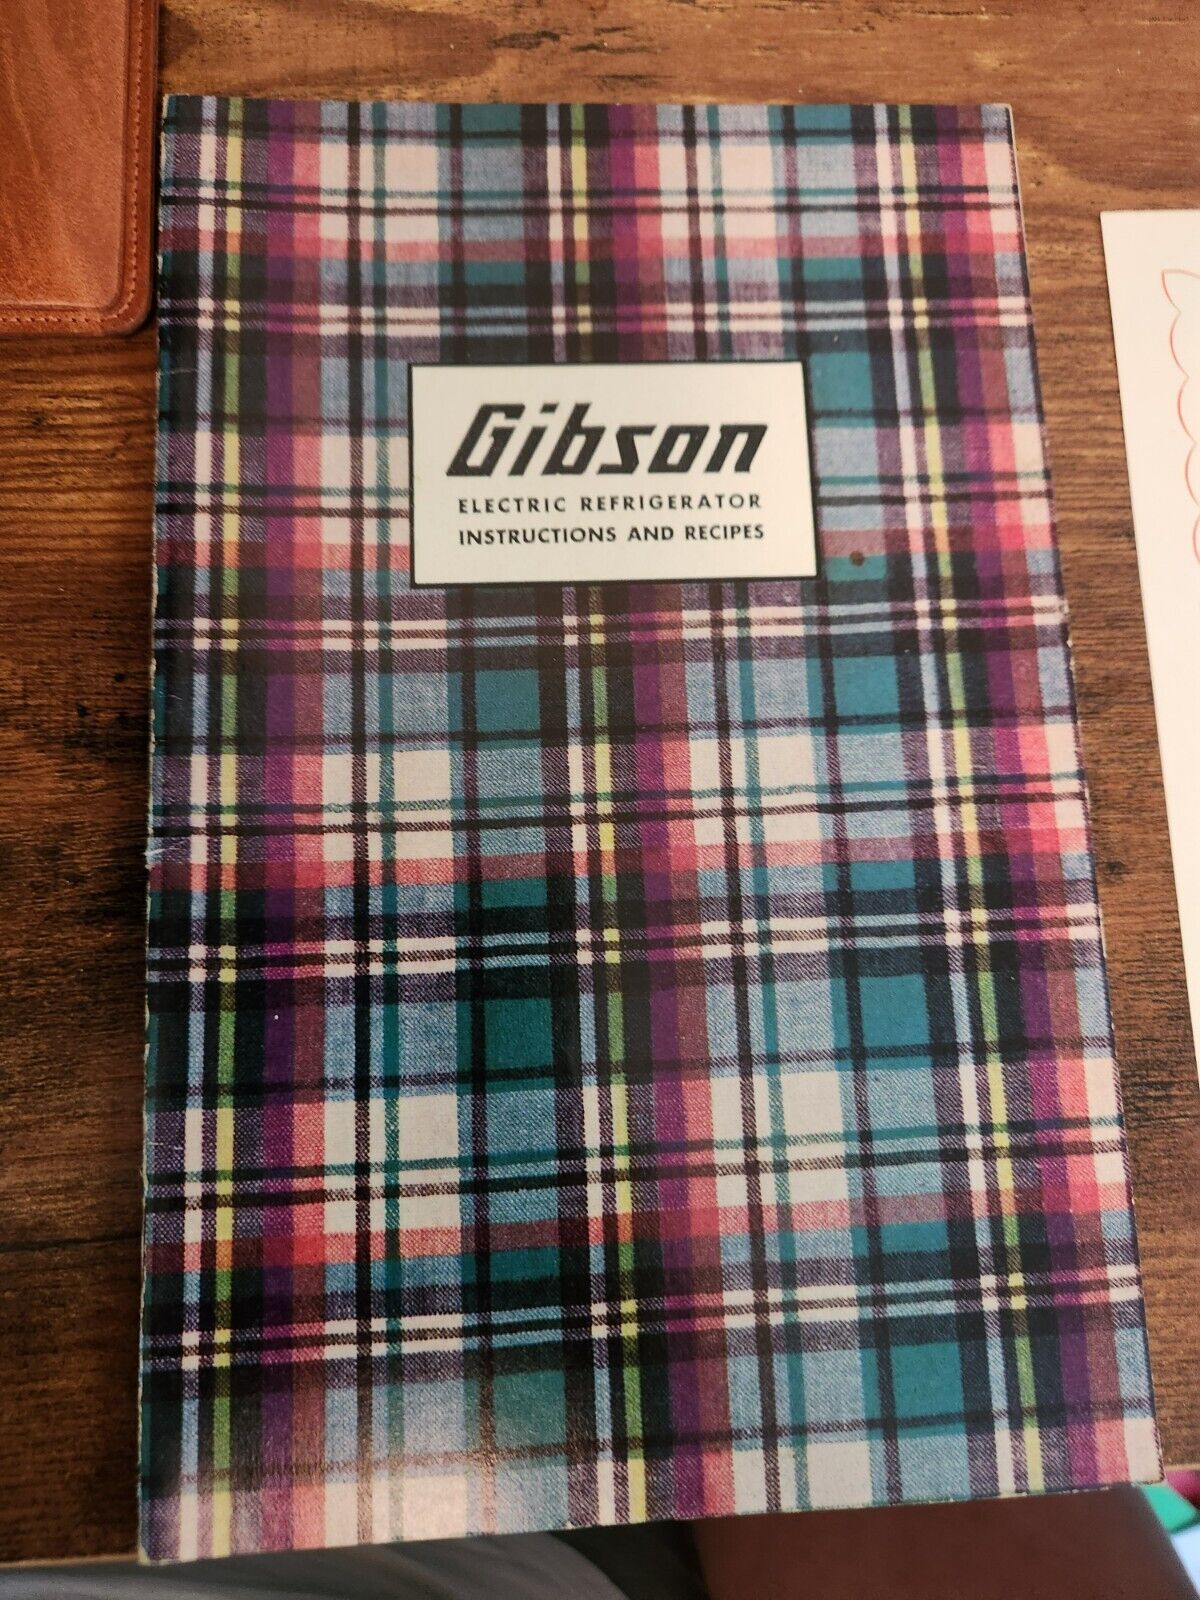 Vintage Gibson Electric instructions and recipes book